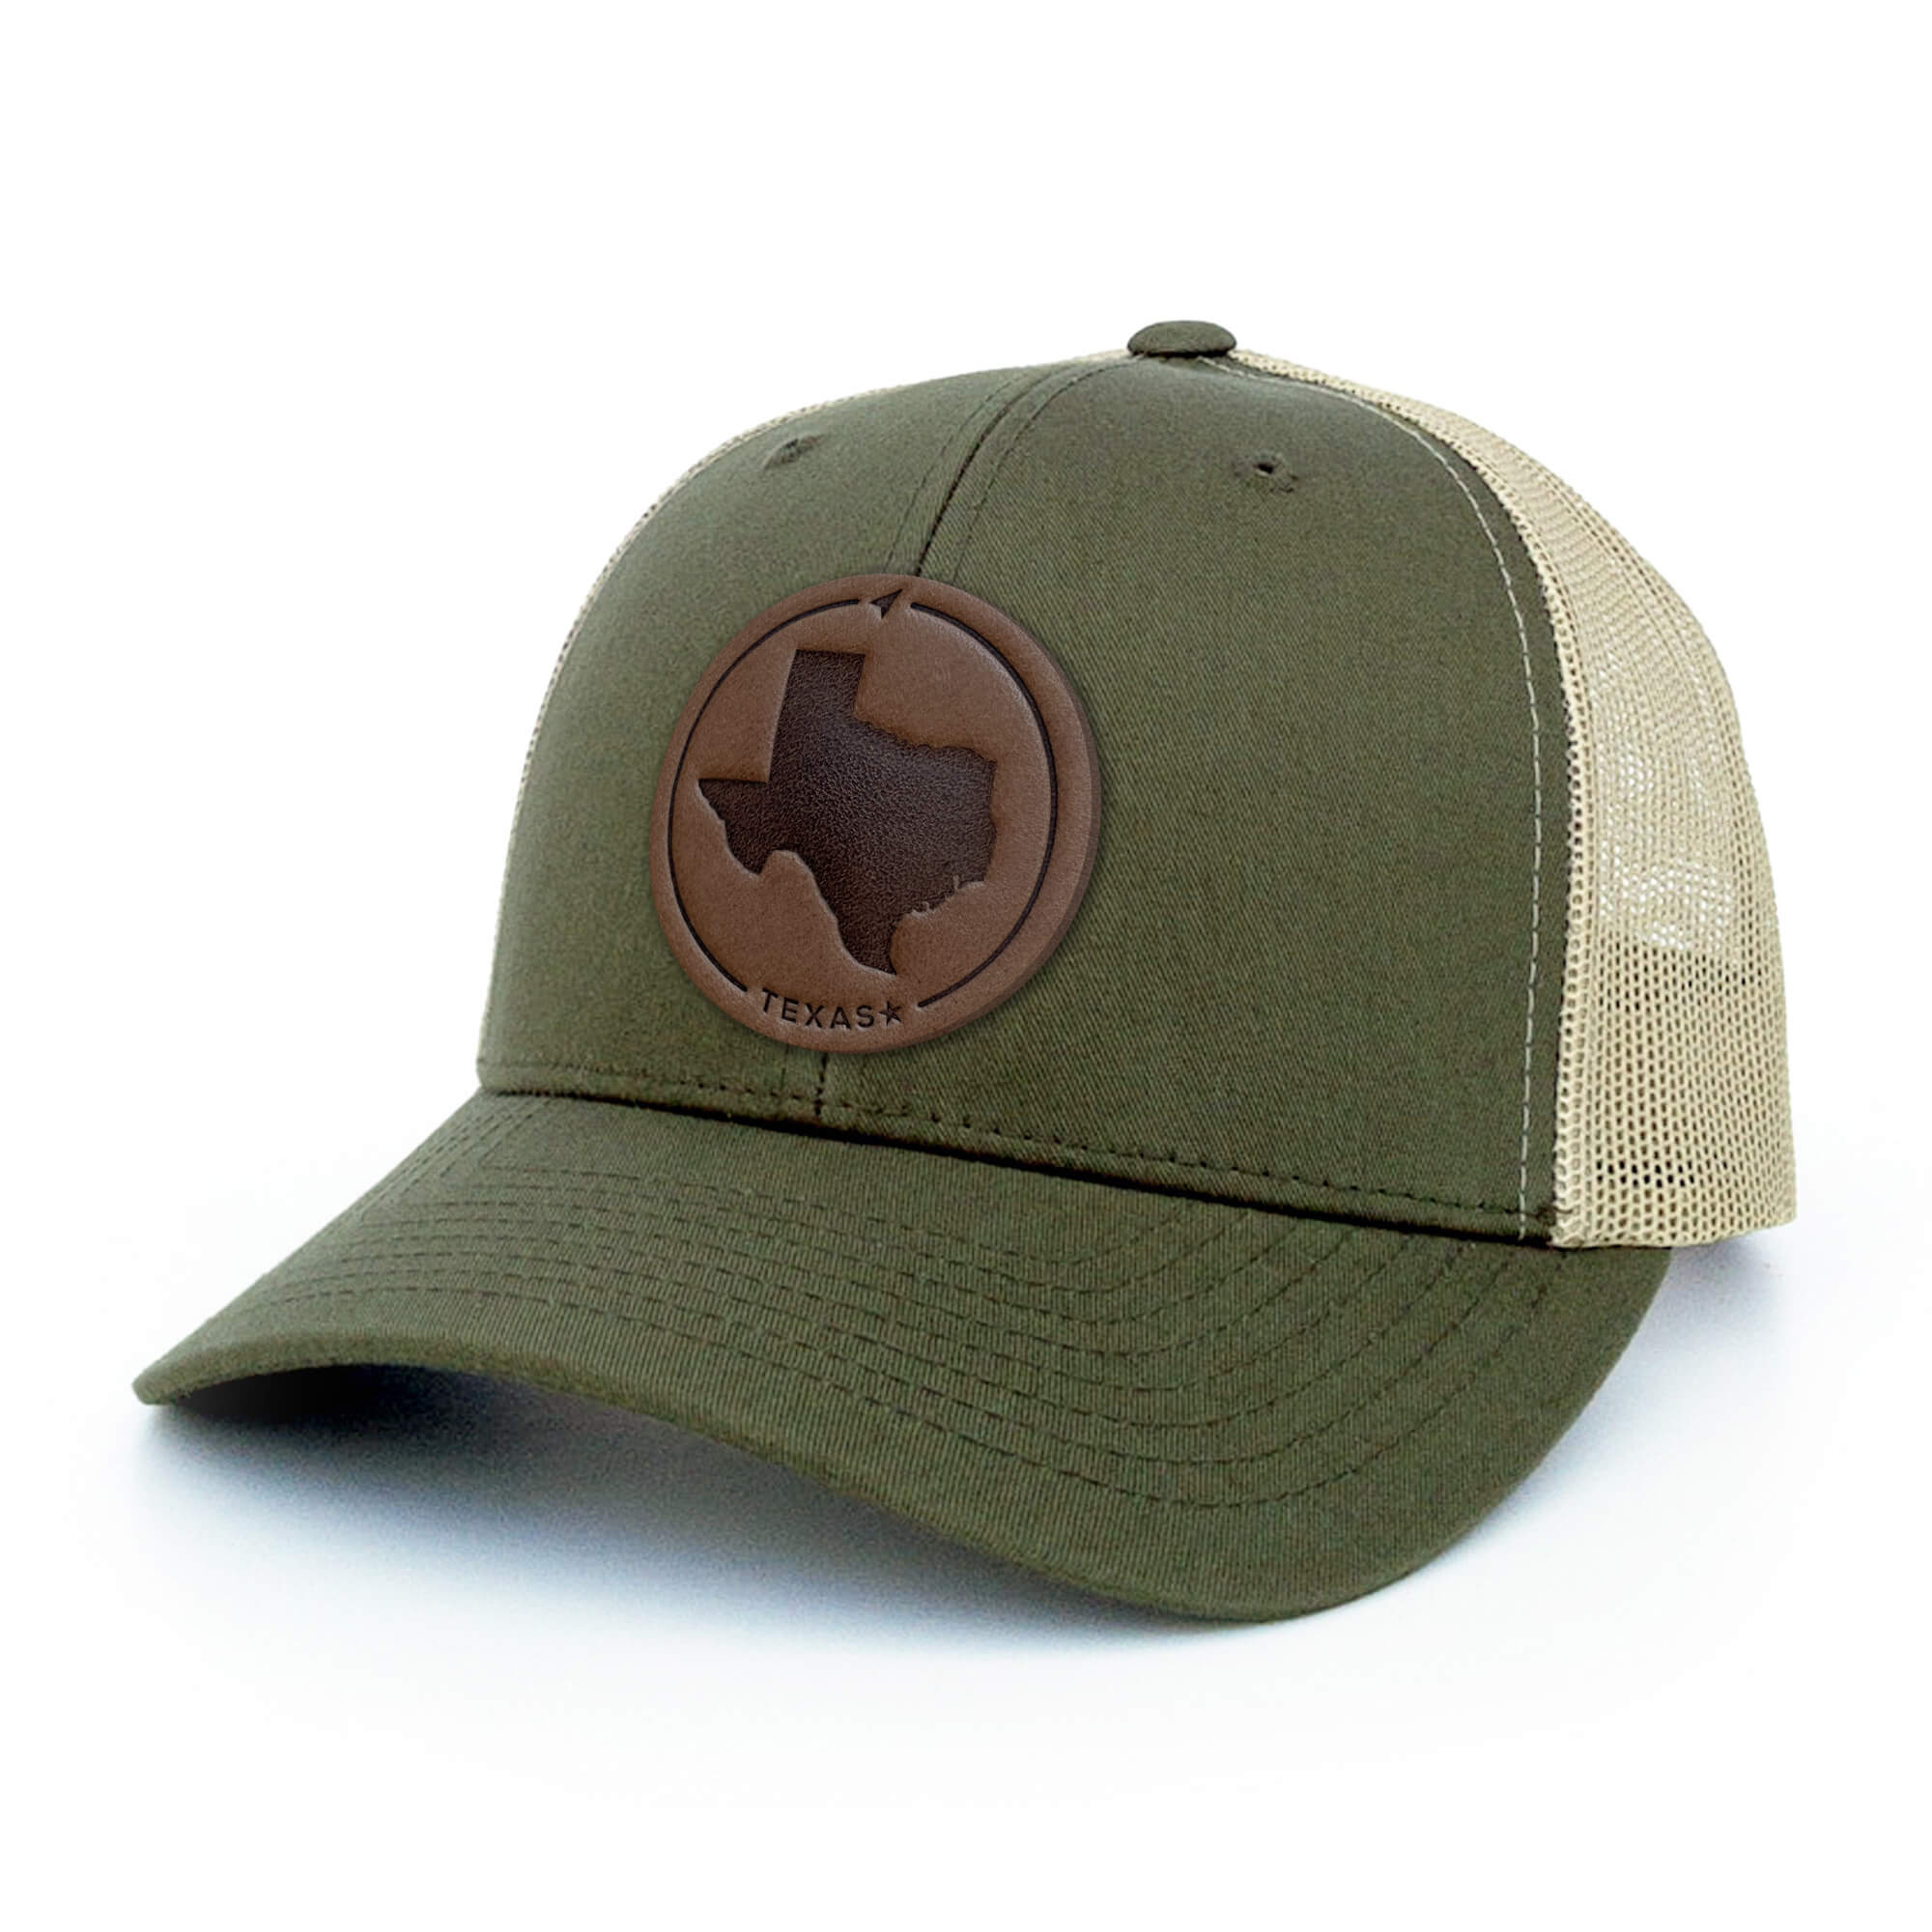 Moss Green and khaki trucker hat with full-grain leather patch of Texas | BLACK-003-002, CHARC-003-002, NAVY-003-002, HGREY-003-002, MOSS-003-002, BROWN-003-002  Edit alt text